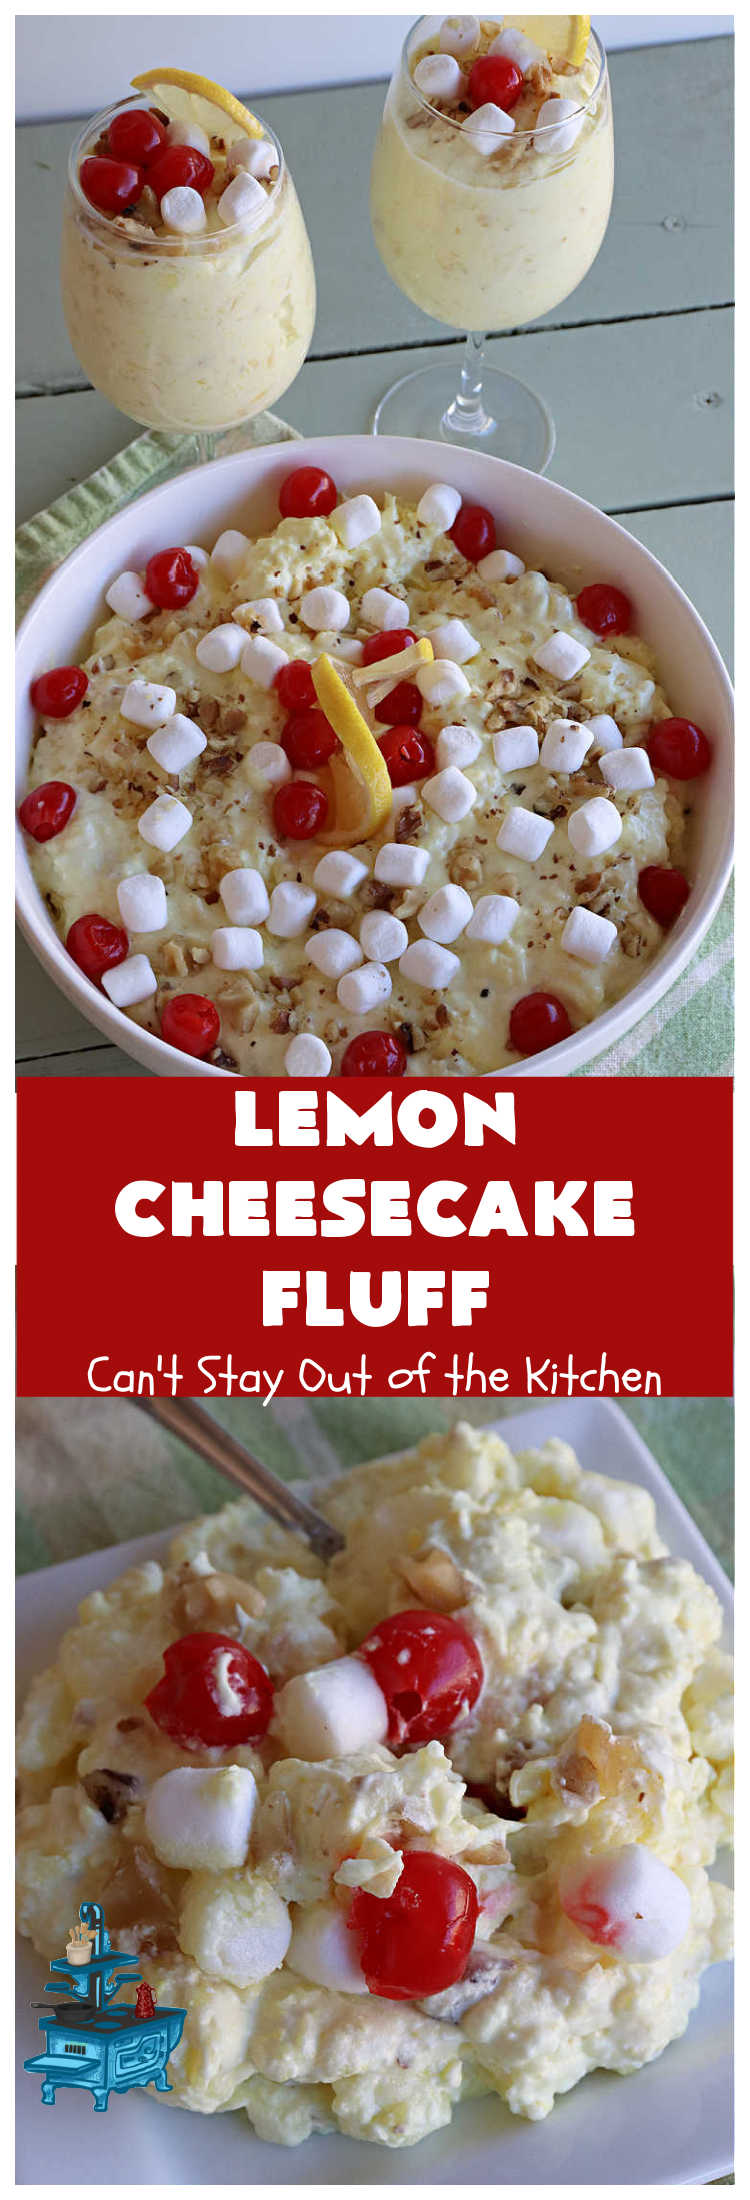 Lemon Cheesecake Fluff | Can't Stay Out of the Kitchen | this spectacular "fluff"-type #FruitSalad is terrific for company or #holiday dinners. It includes #CreamCheese, #CheesecakePuddingMix, #Lemon #JellO, miniature #marshmallows, #CoolWhip & #walnuts.Serve it in a trifle dish, glass bowl or parfait glasses for special occasions. #LemonCheesecakeFluff #salad